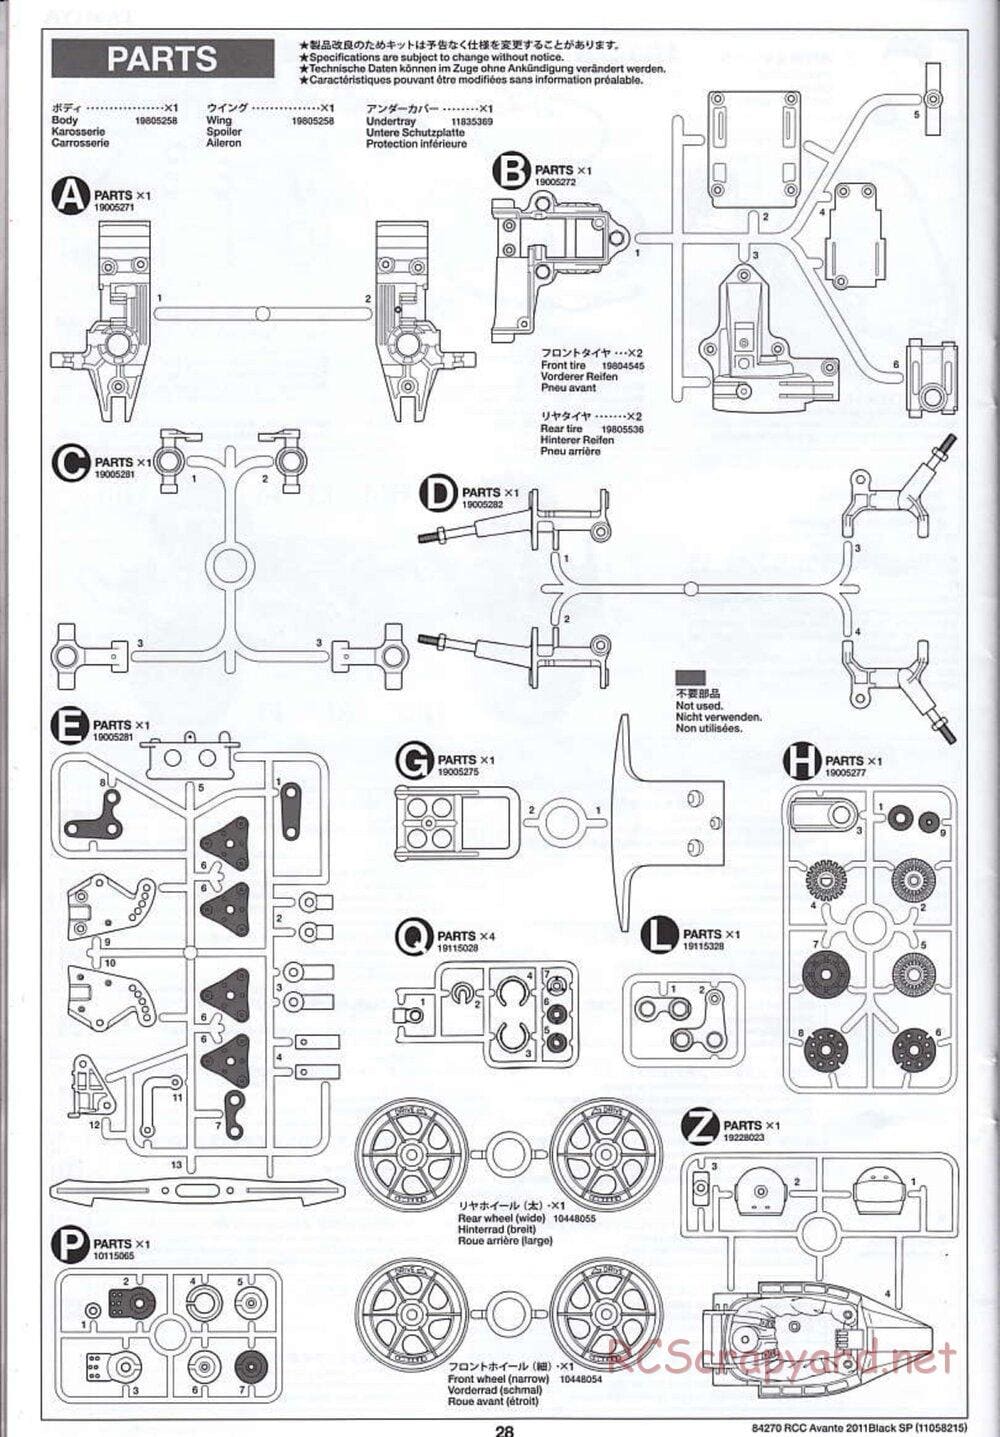 Tamiya - Avante 2011 - Black Special Chassis - Manual - Page 28